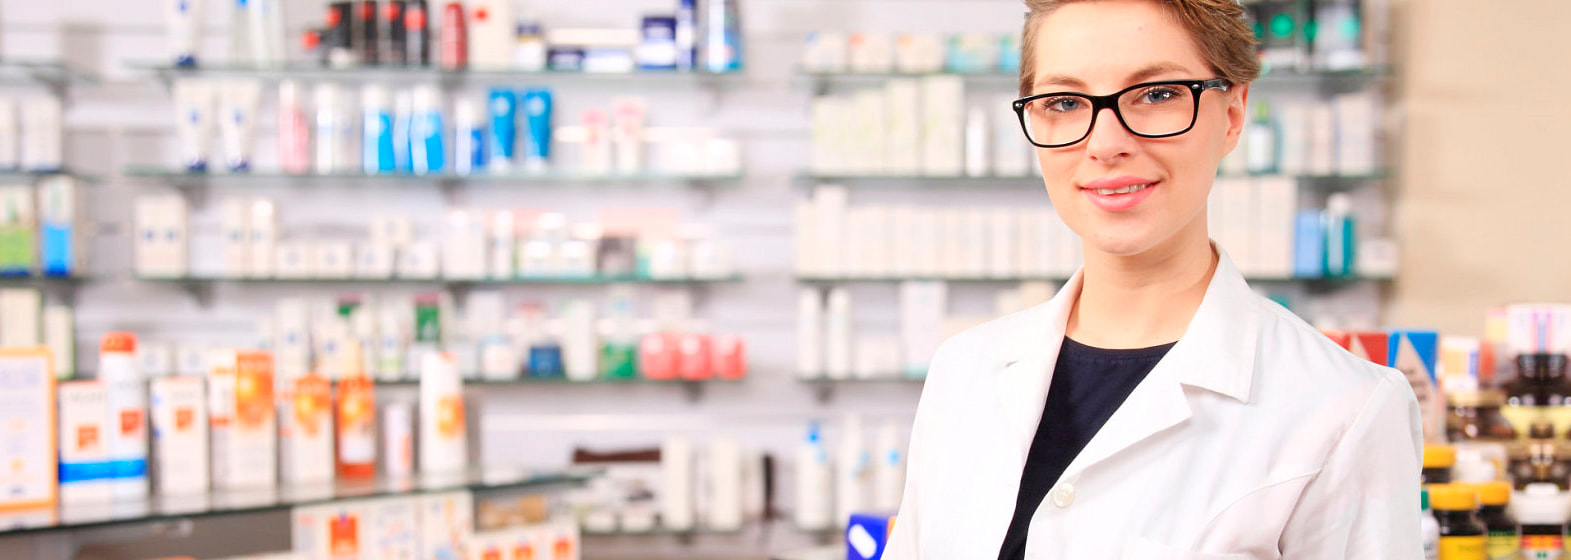 BENEFITS OF CANADIAN PHARMACY - Home